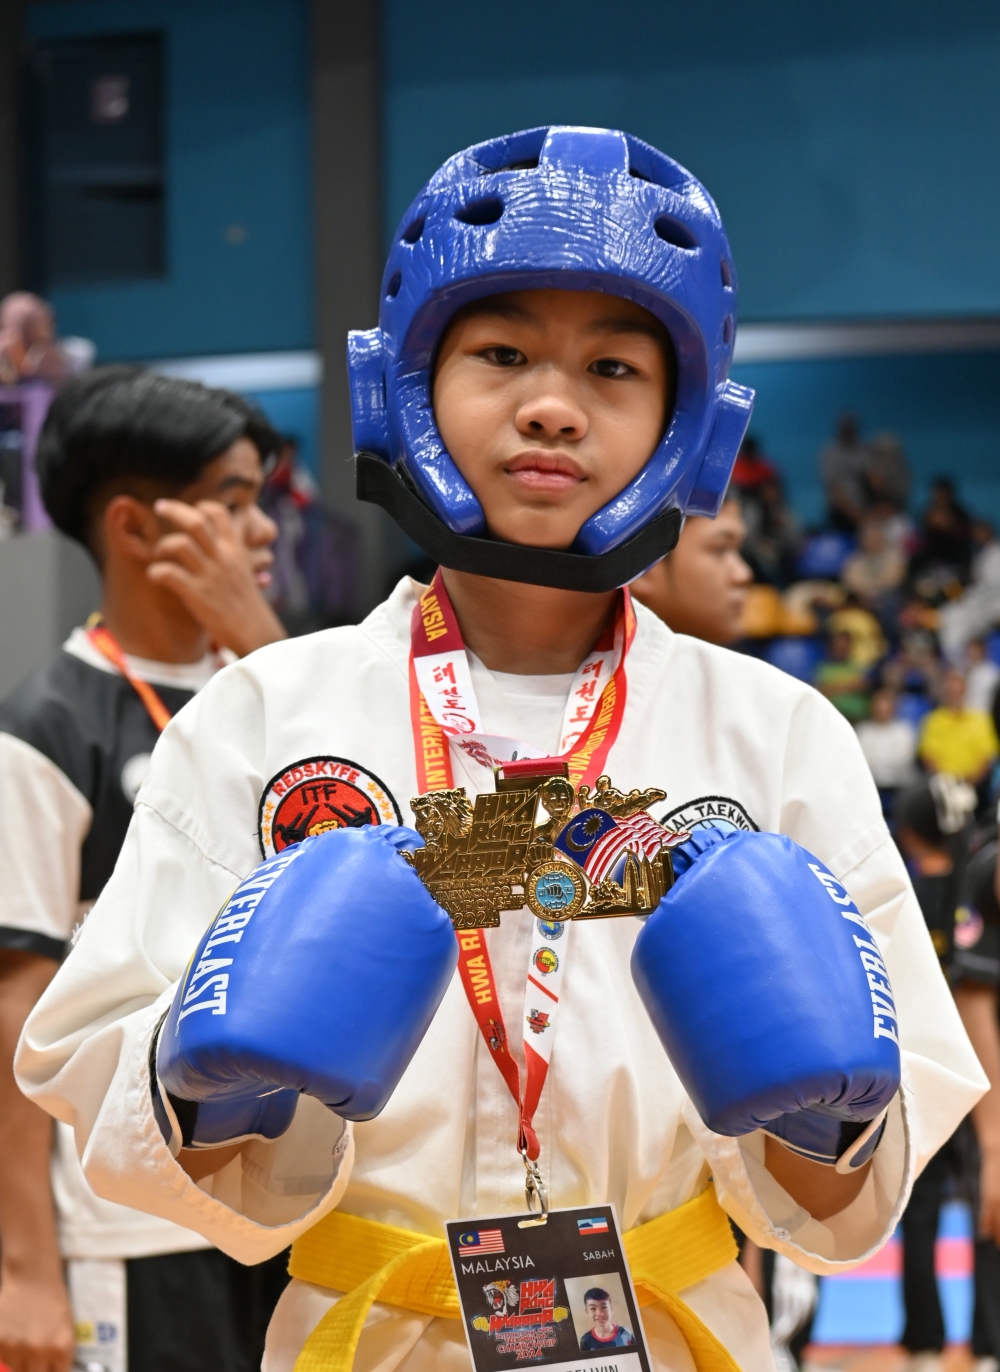 Leonel Bellvin, 12, poses with the gold medal he won in the men’s kyorugi (combat) event, competing in the 38-45kg category for the 11-to-12 age group at the 2024 Hwarang Warrior International Taekwondo Championship in Kuala Lumpur March 1, 2024. — Bernama pic